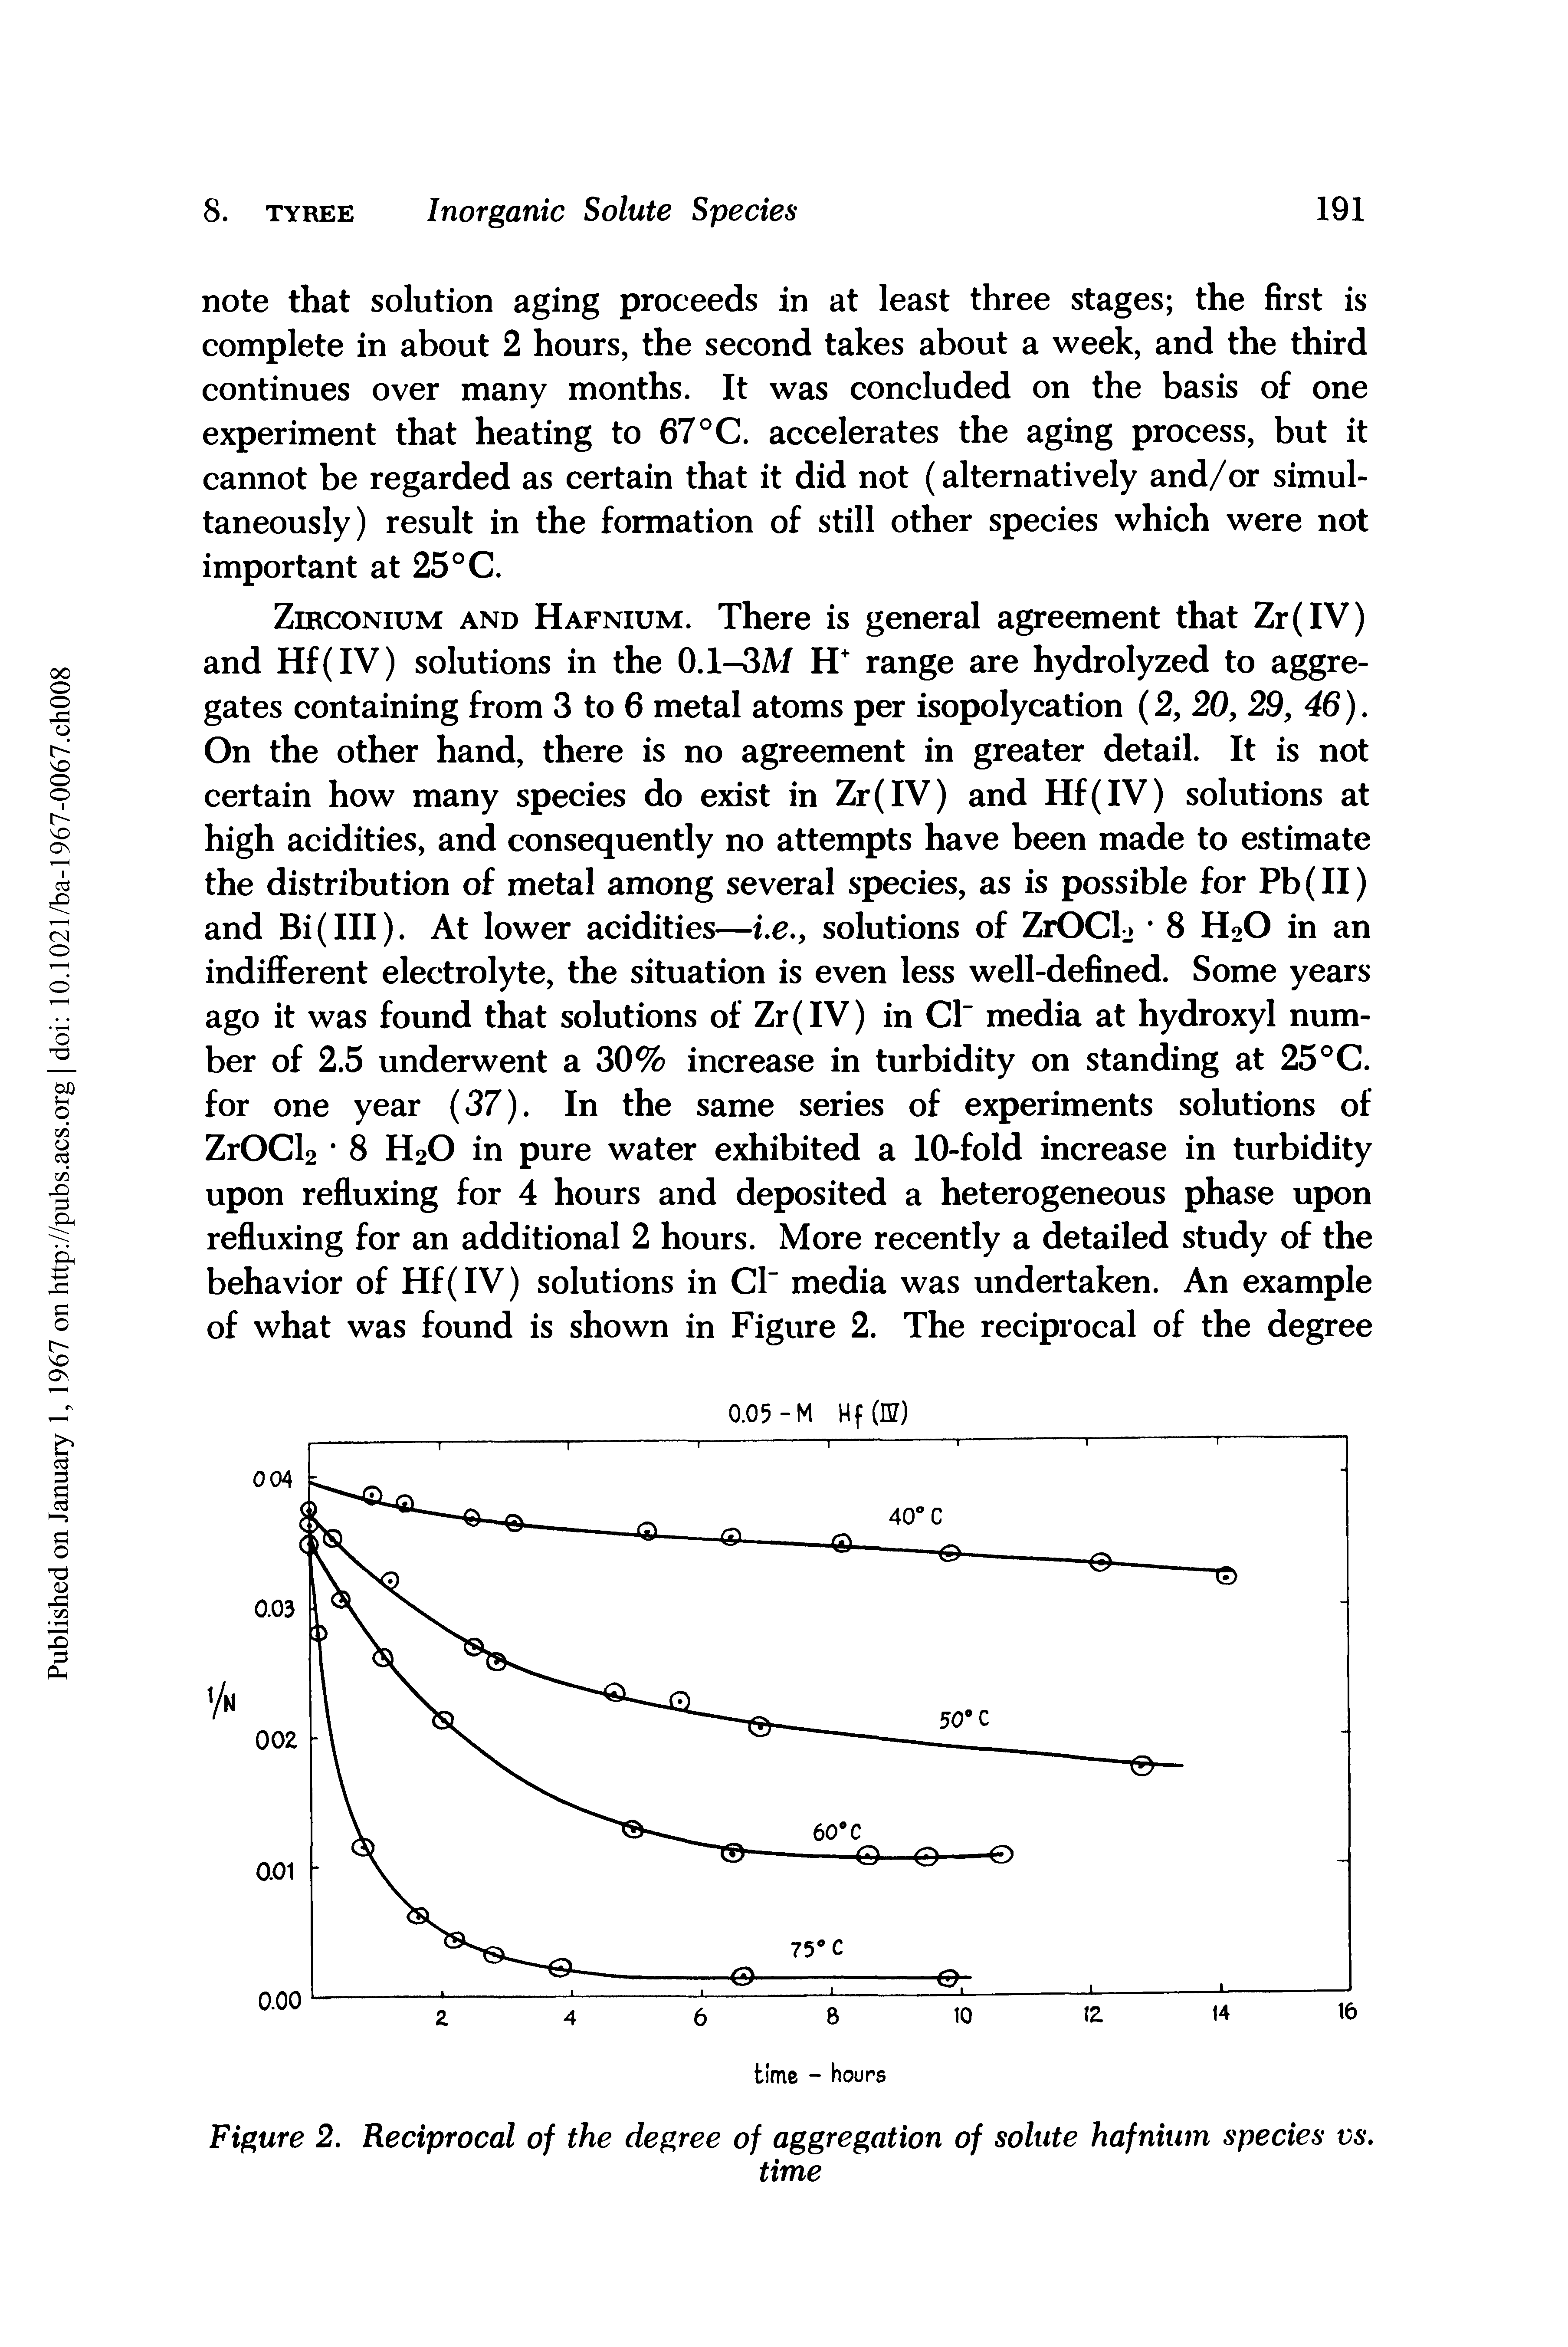 Figure 2. Reciprocal of the degree of aggregation of solute hafnium species vs.